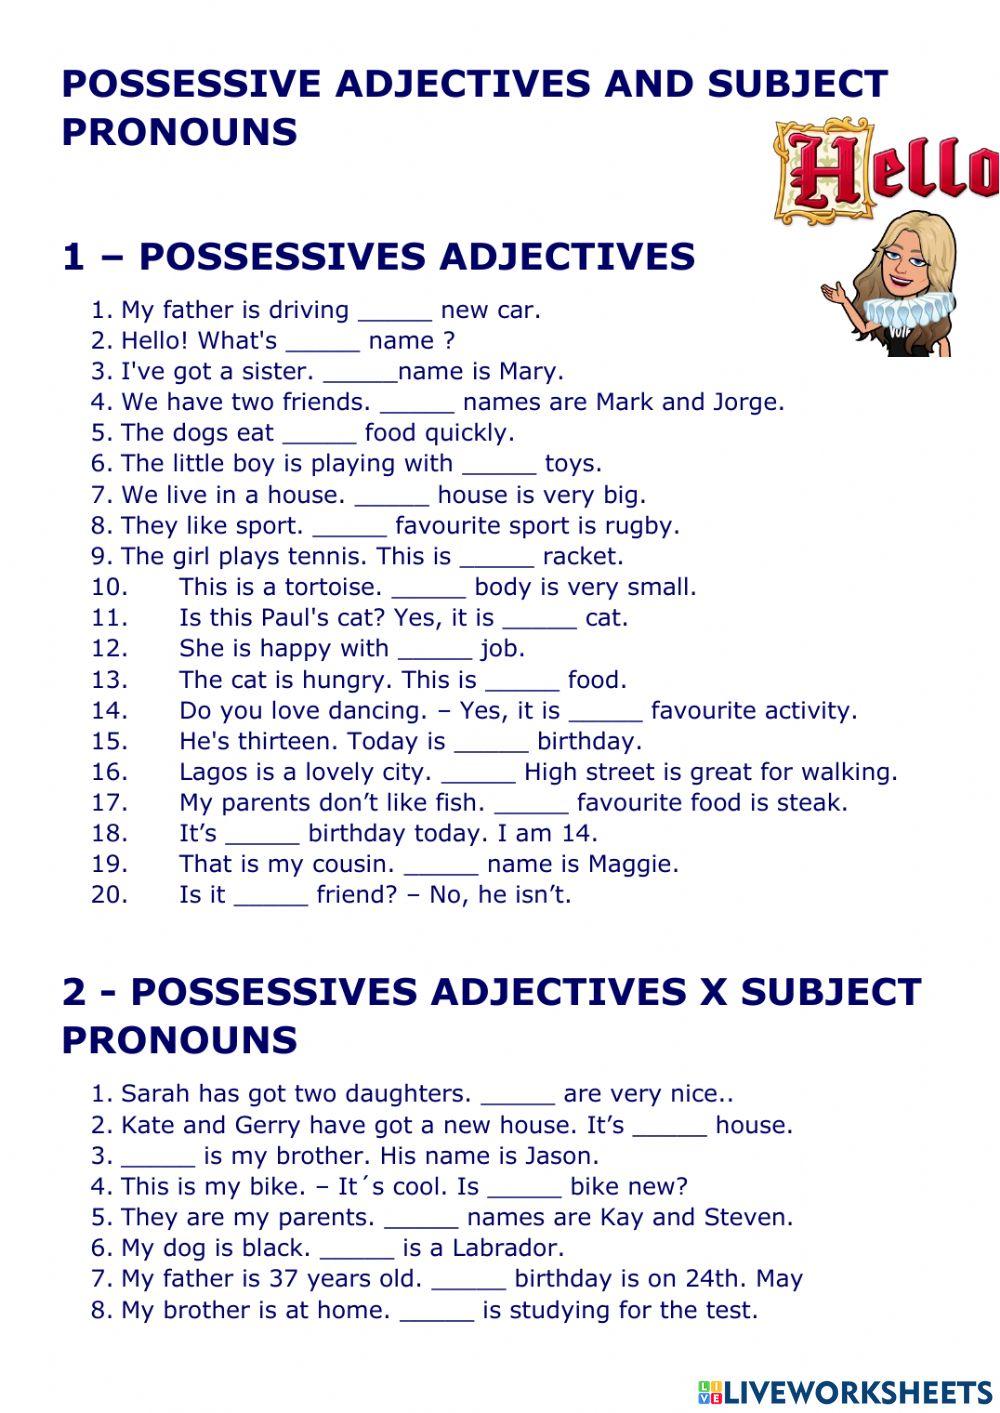 Possessives adjectives and subject pronouns